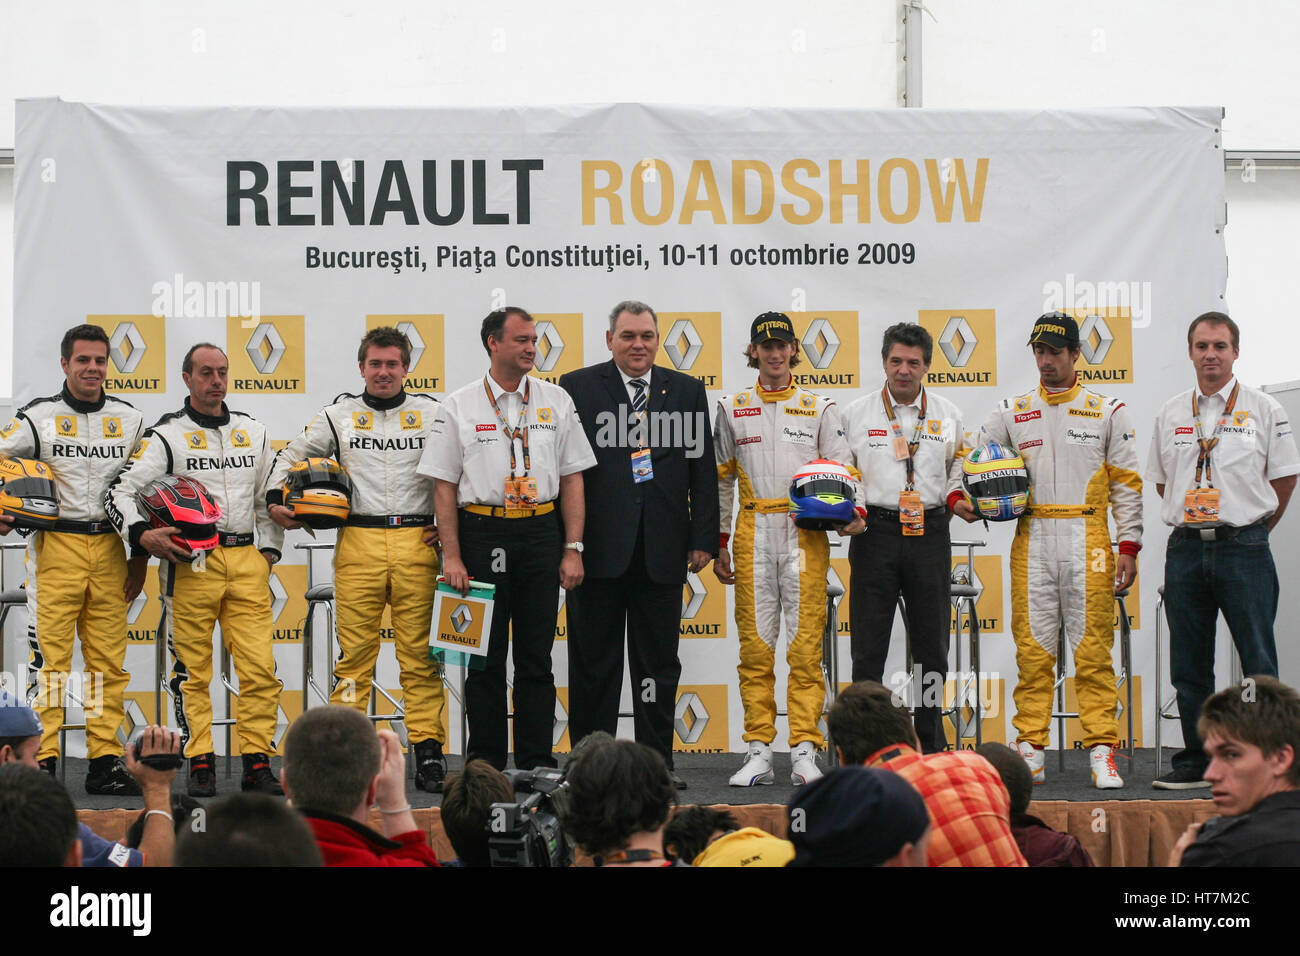 Bucharest, Romania, October 10, 2009: Pilots from the Renault team poses during a press conference on the occasion of Renault Road show held in Buchar Stock Photo